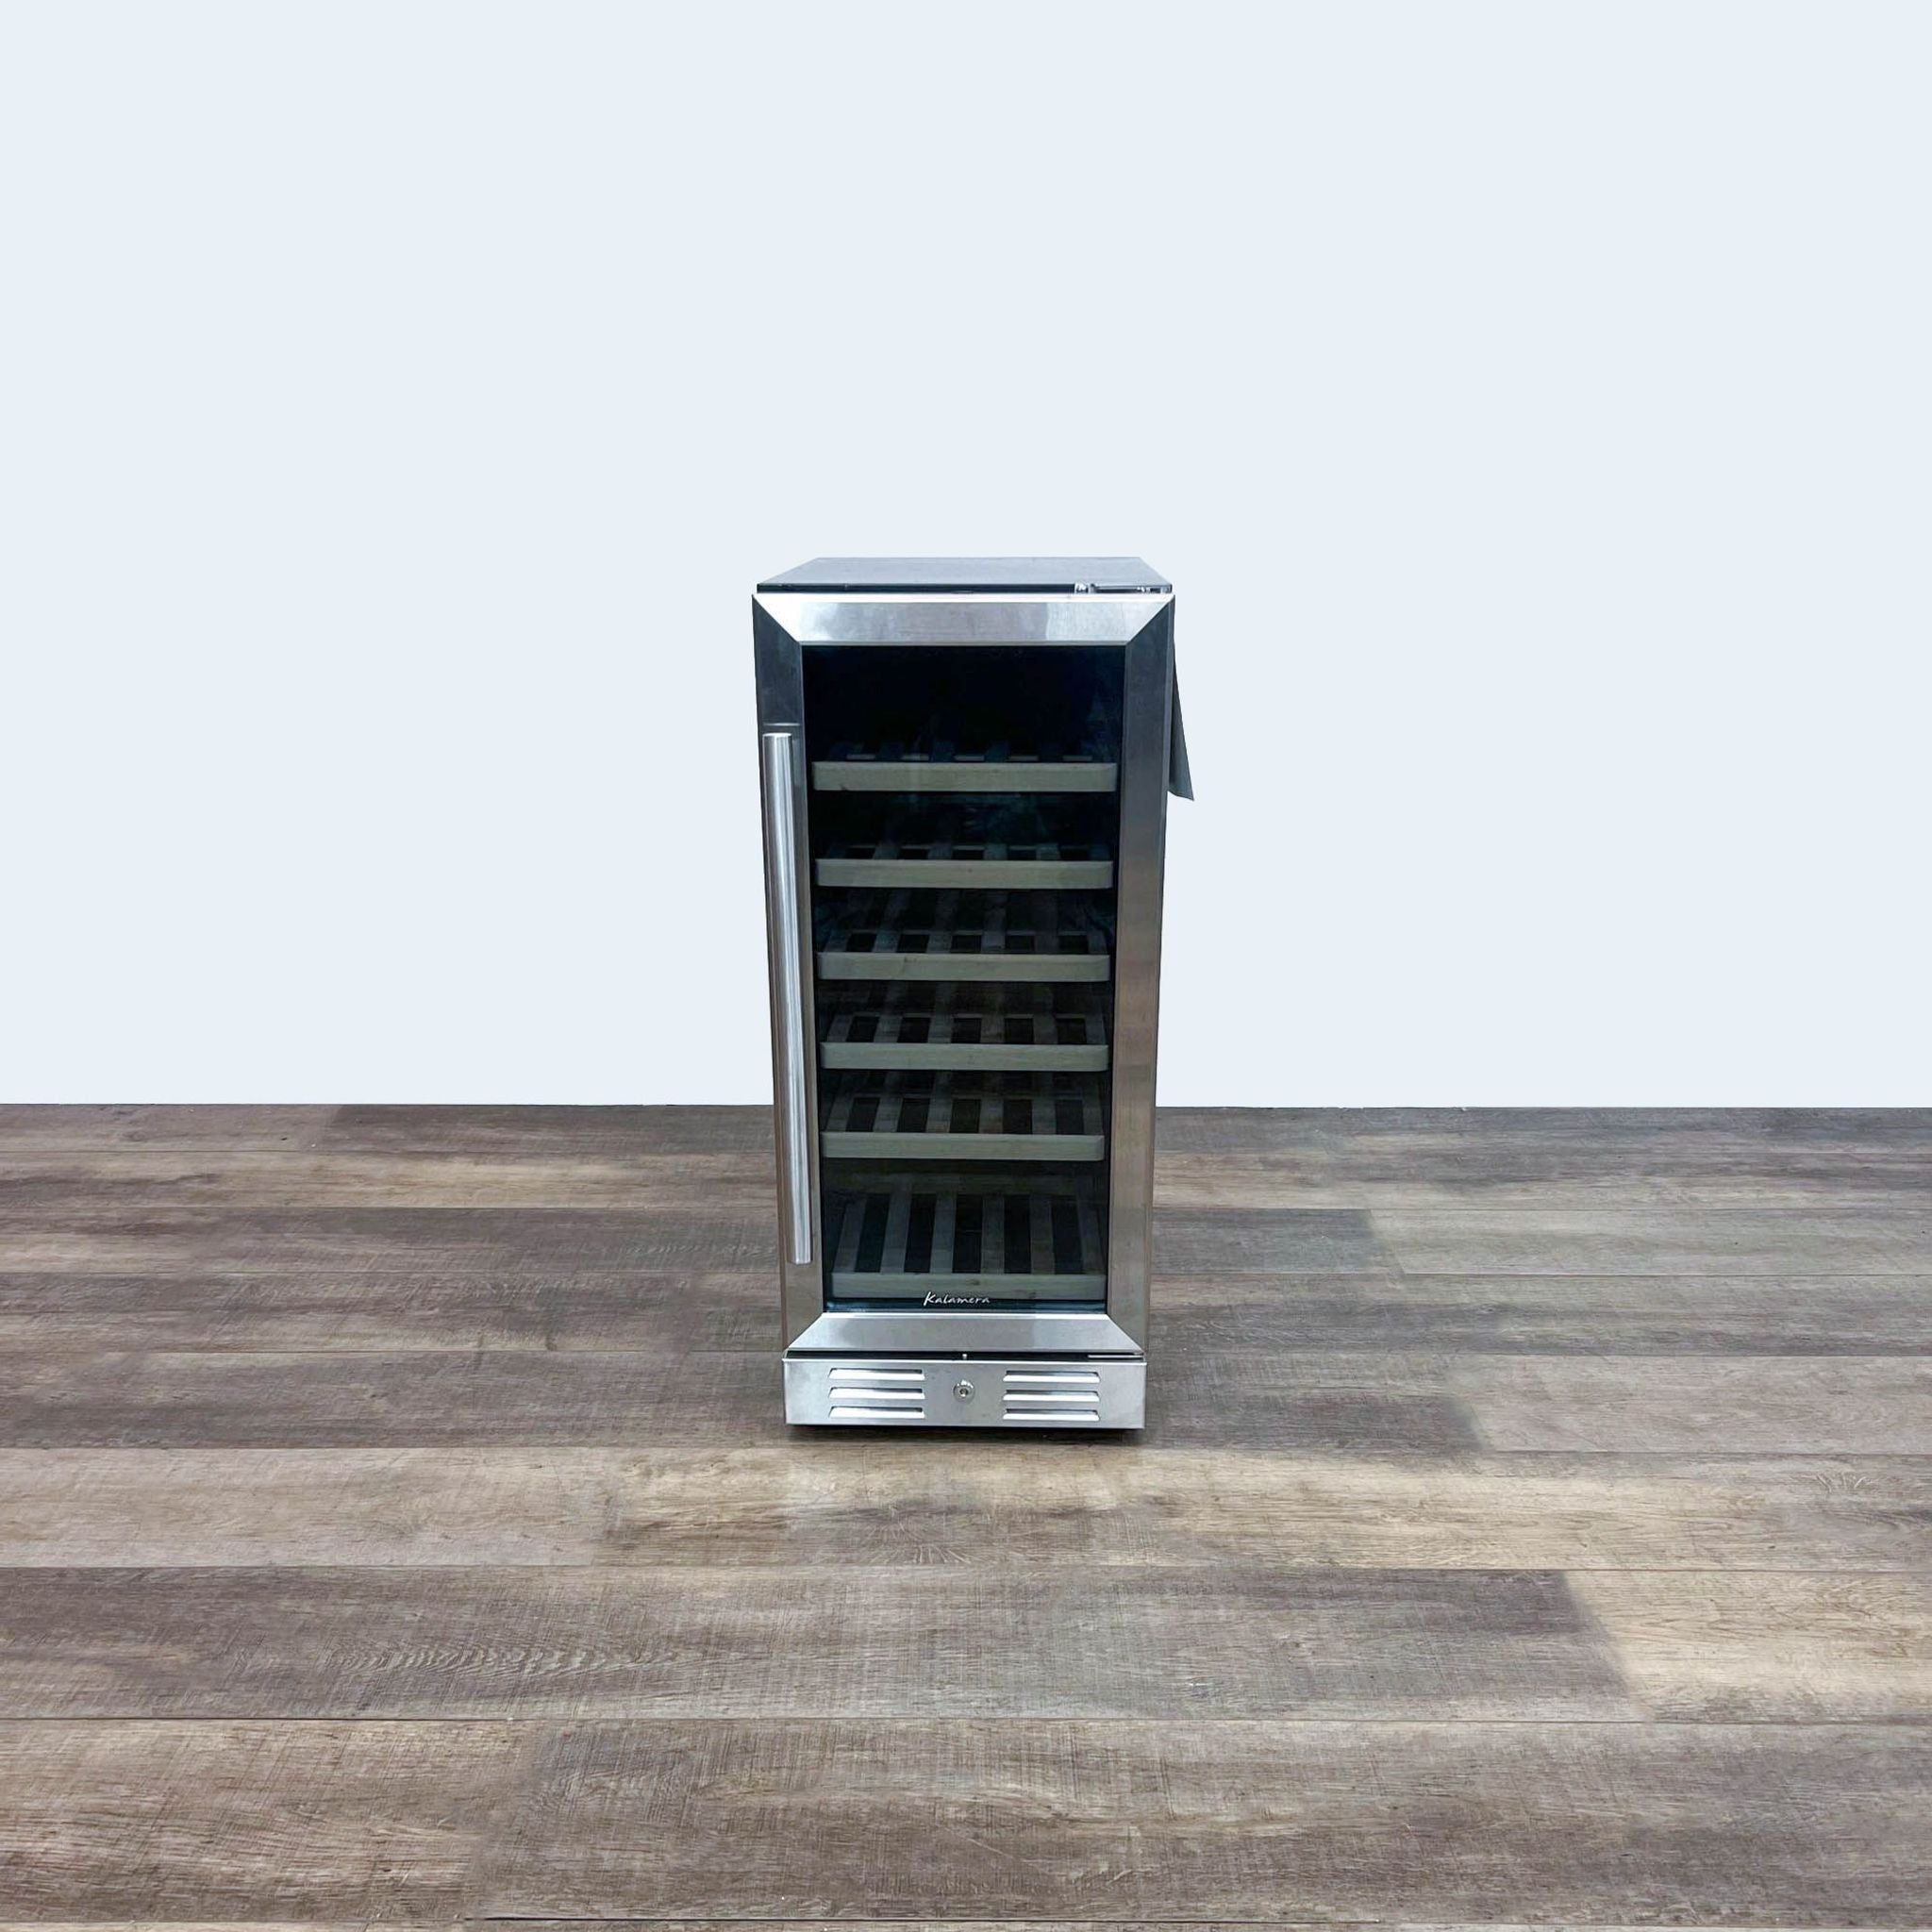 1. Stainless steel Kalamera beverage refrigerator with glass door open and wooden shelves, on a wooden floor against a white wall.